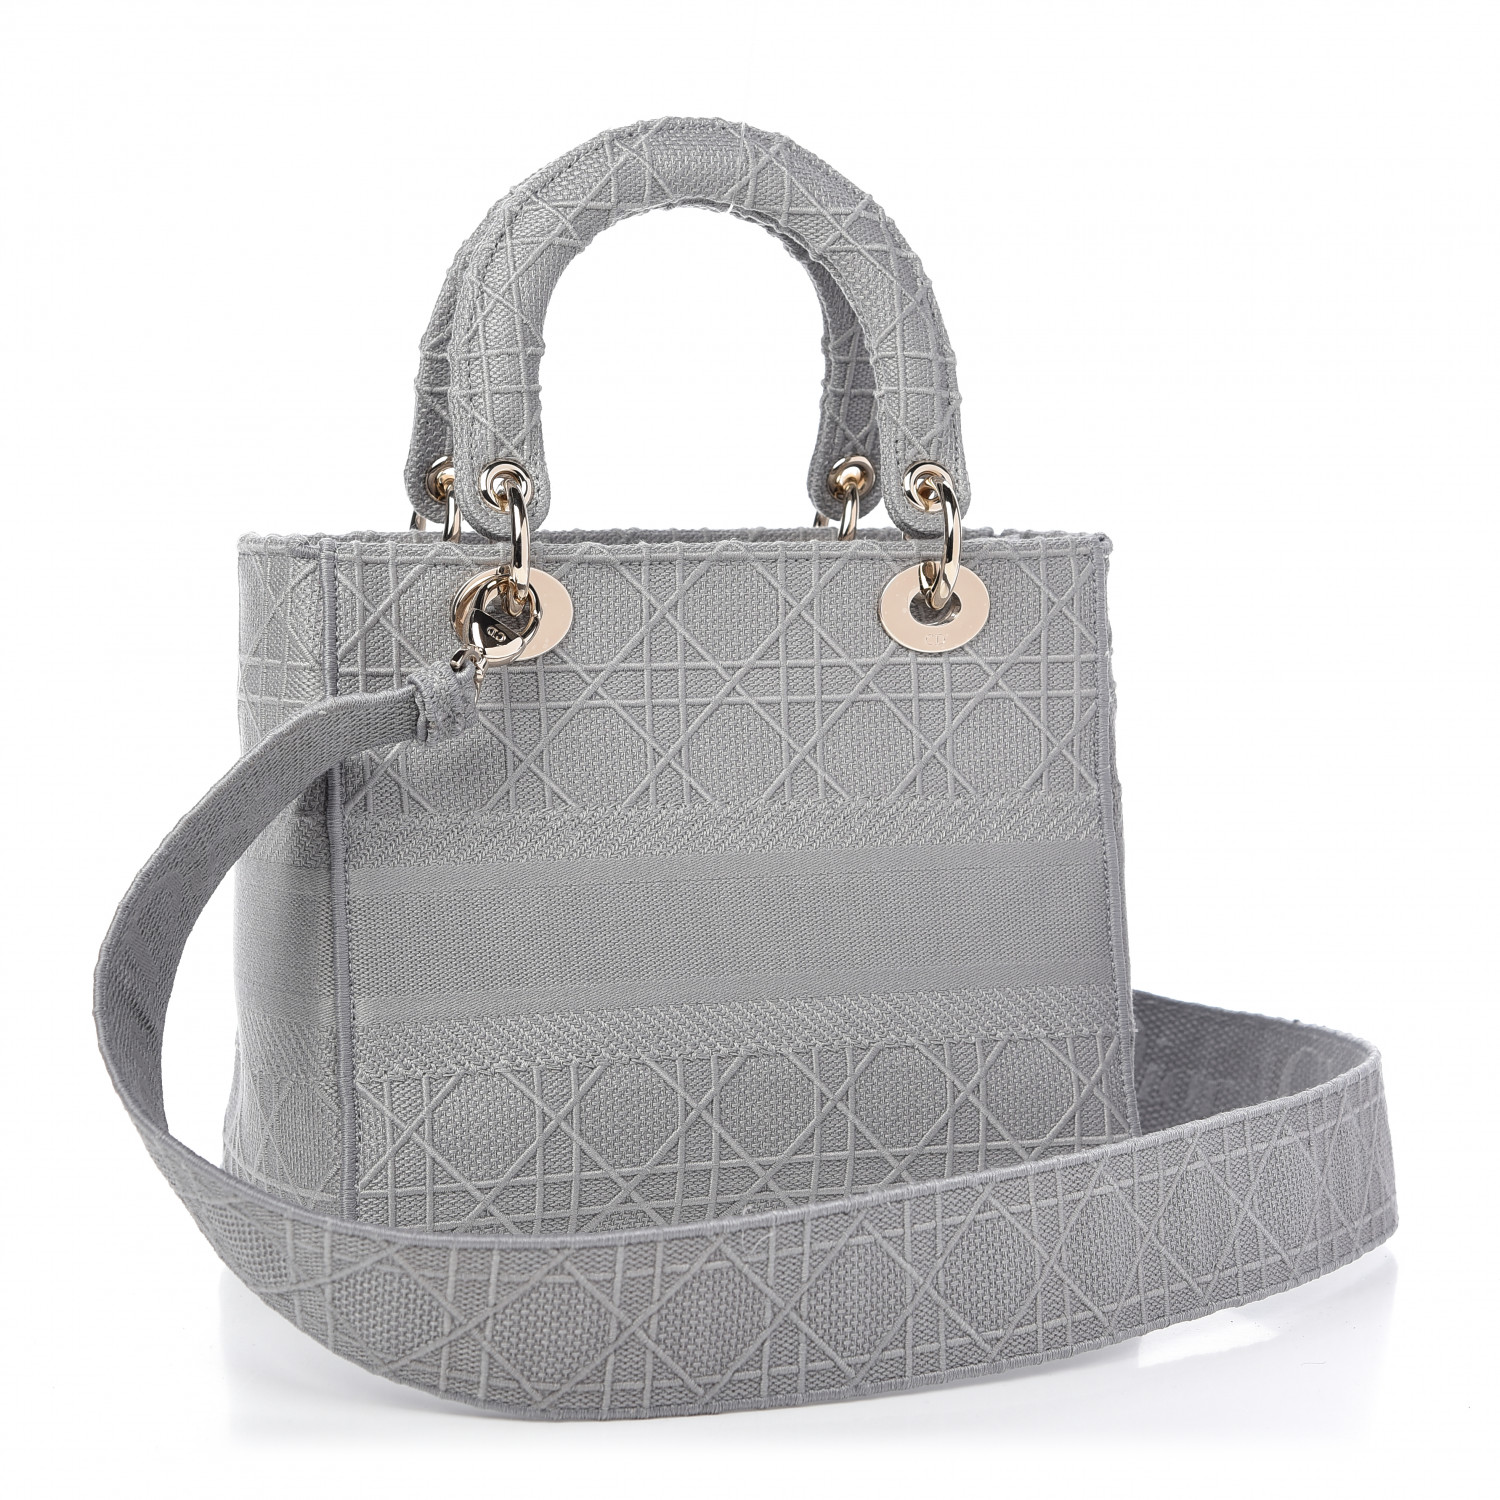 1DIOR Canvas Embroidered Cannage Medium Lady D-Lite Gray